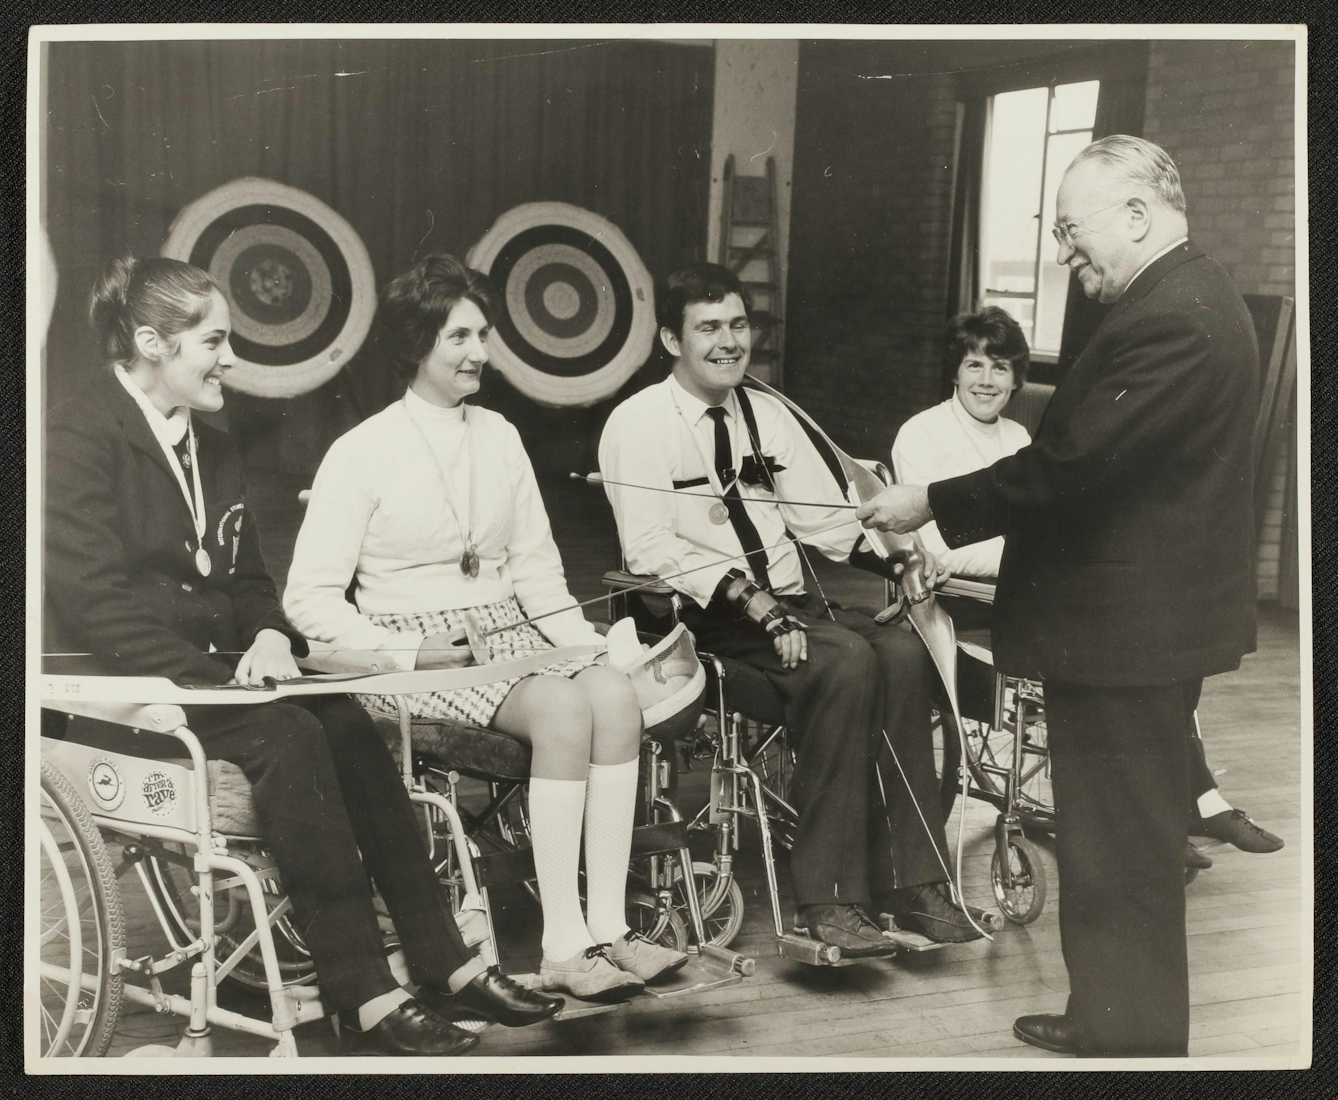 Black and white photographic print of Sir Ludwig Guttmann, on the right of the photograph, meeting with four athletes sitting in wheelchairs. Guttman wears a dark suit and shoes and faces away from the camera and toward the athletes but you can see from his profile that the bespectacled man with light hair is smiling. The athletes hold sporting equipment. The woman on the left has a beaming smile and medal and wears her hair in a bun. She holds a bow across her lap. The woman who is second from left is also smiling and has two medals around her neck. She holds a fencing foil, as does Guttmann, who appears to be speaking with her and chuckling at the moment the photograph was taken. Next is a grinning man with dark hair wearing a medal and a shirt and tie. He has straps on his wrists and holds a bow. Slightly behind Guttmann in the photograph, there is another smiling woman who also appears to have a medal ribbon around her neck. 